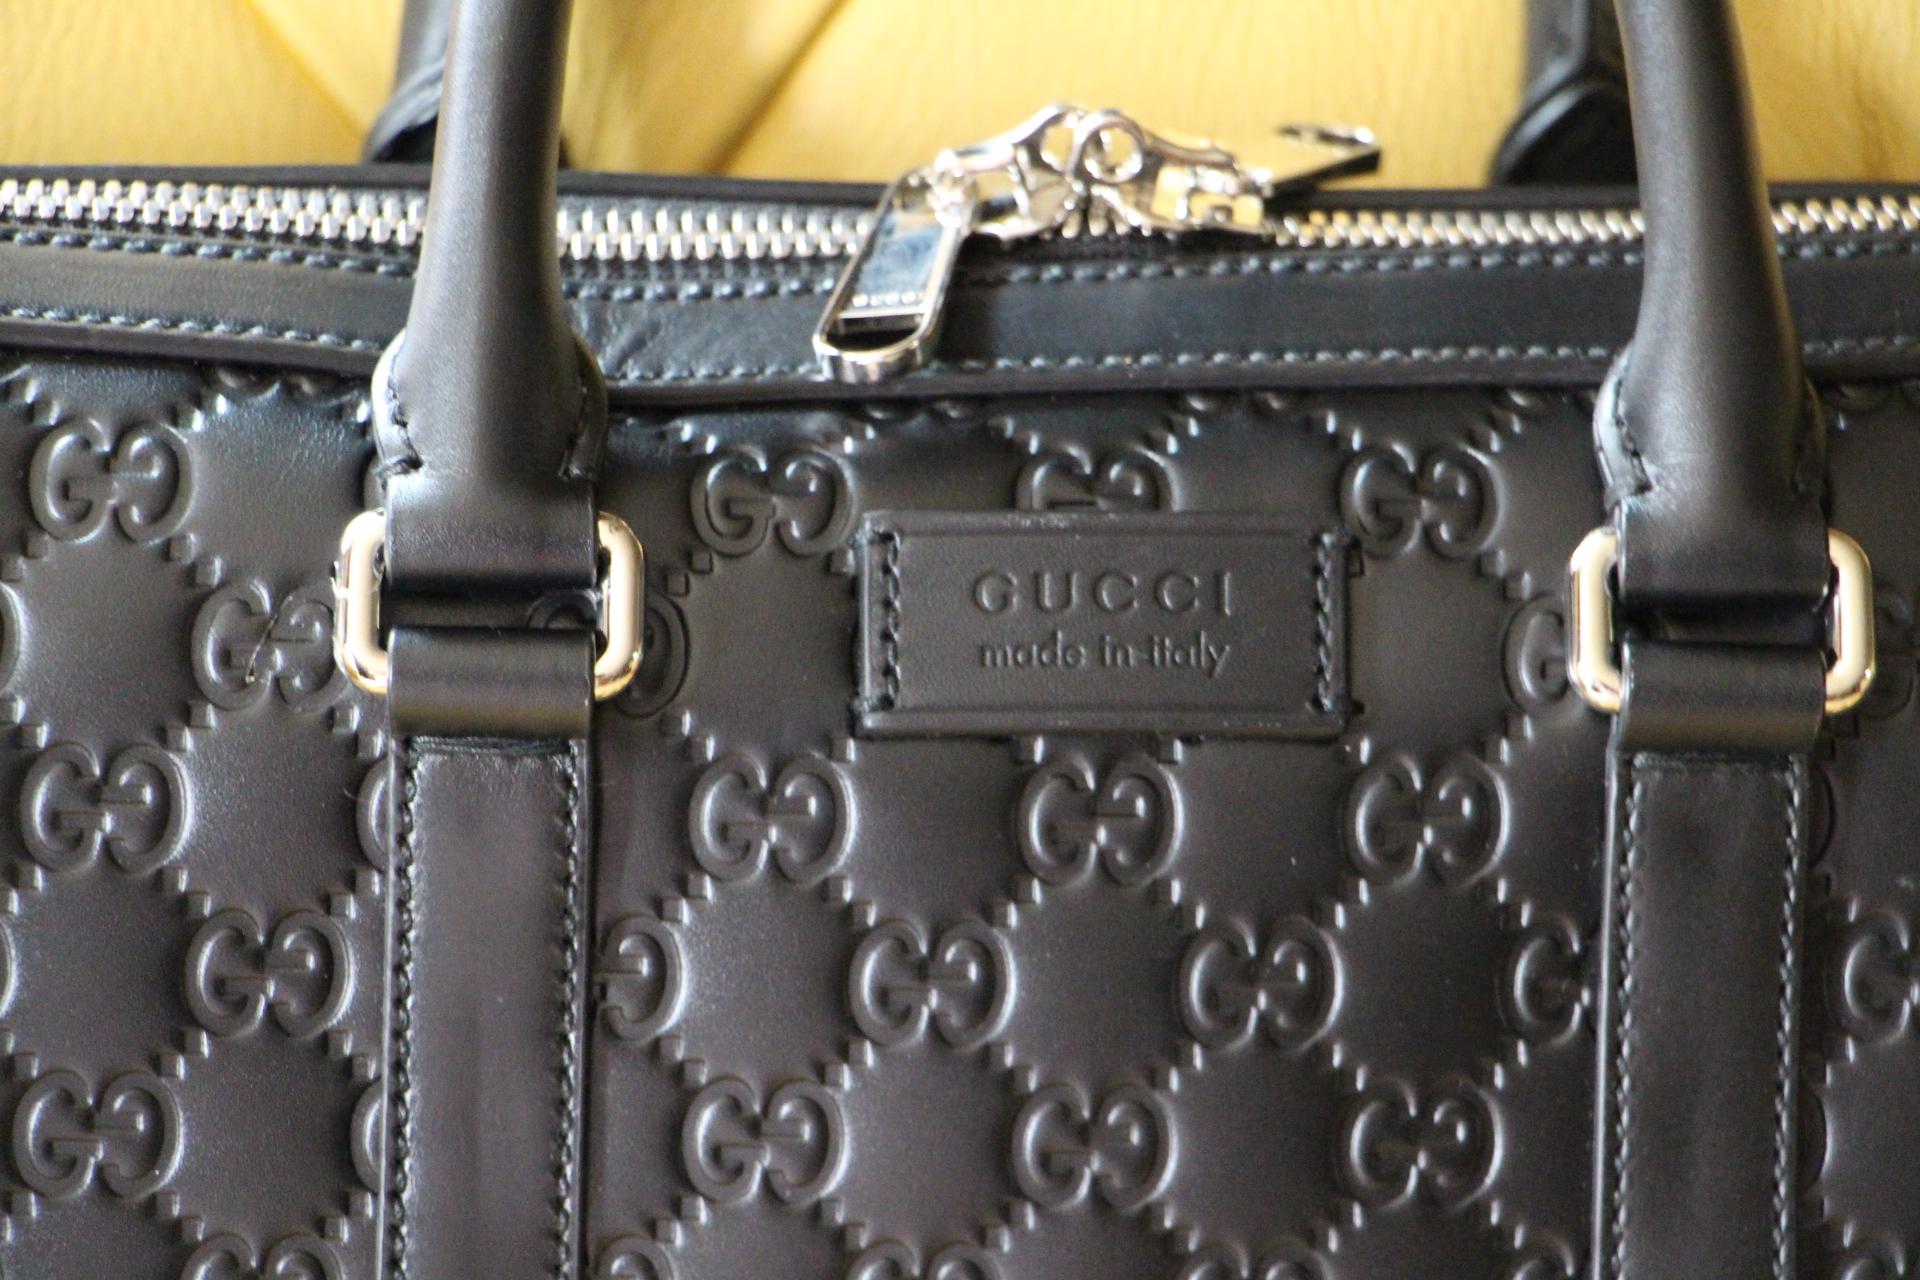 
 Brand new Black Gucci Signature leather bag with black leather trimsand a double zip closure. 
 Palladium-toned hardware
 1 Gucci padlock.
   Interior zipper and smartphone pockets
   Padded iPad compartment
   Double leather handles with 10cm